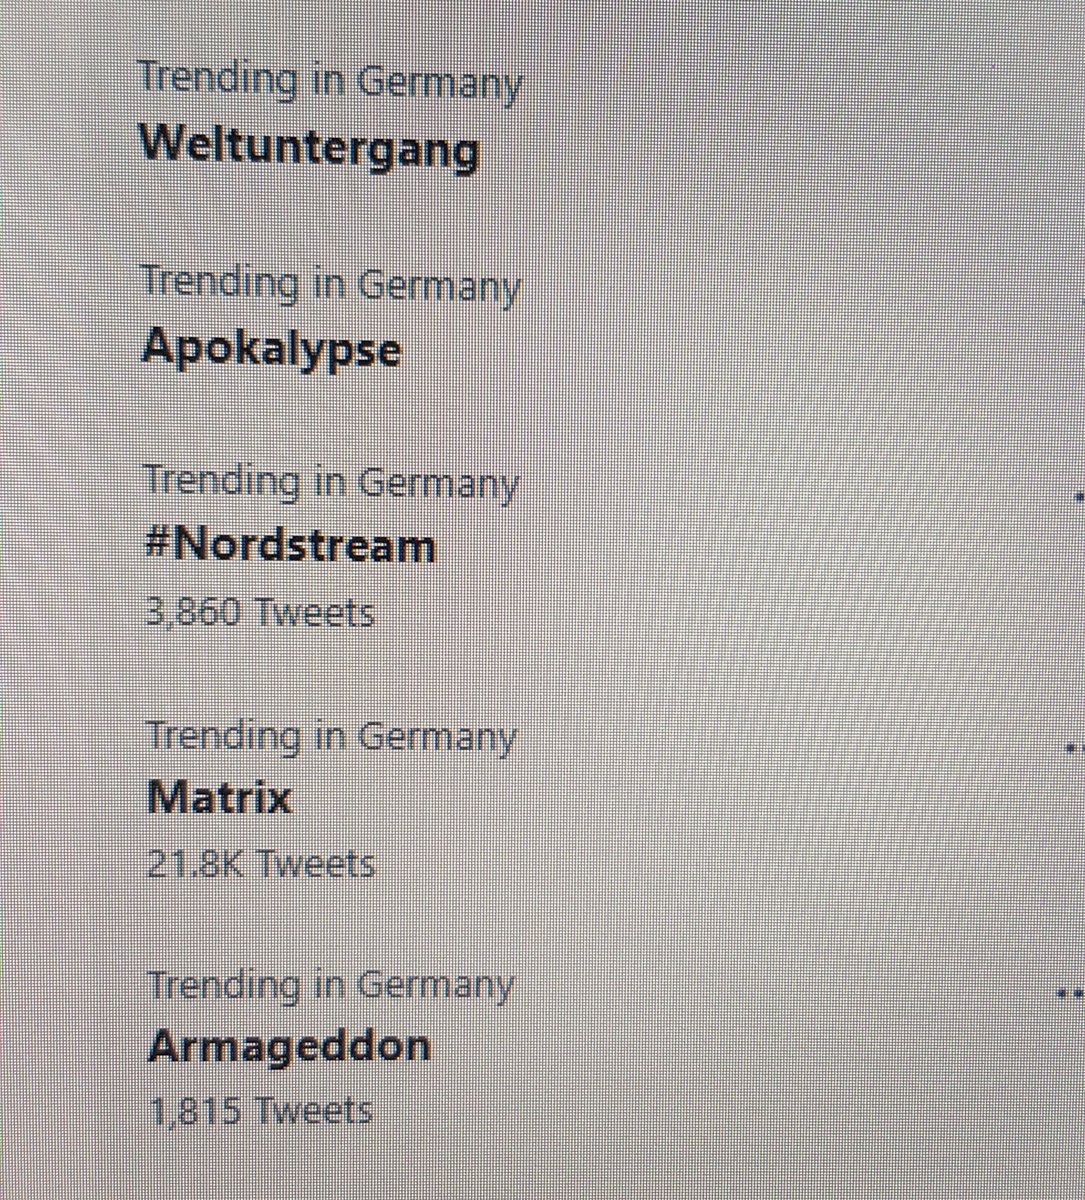 Uhm... Here in Germany WORLD'S END, APOCALYPSE, ARMAGEDDON and MATRIX are trending.

Did I miss something? 😅